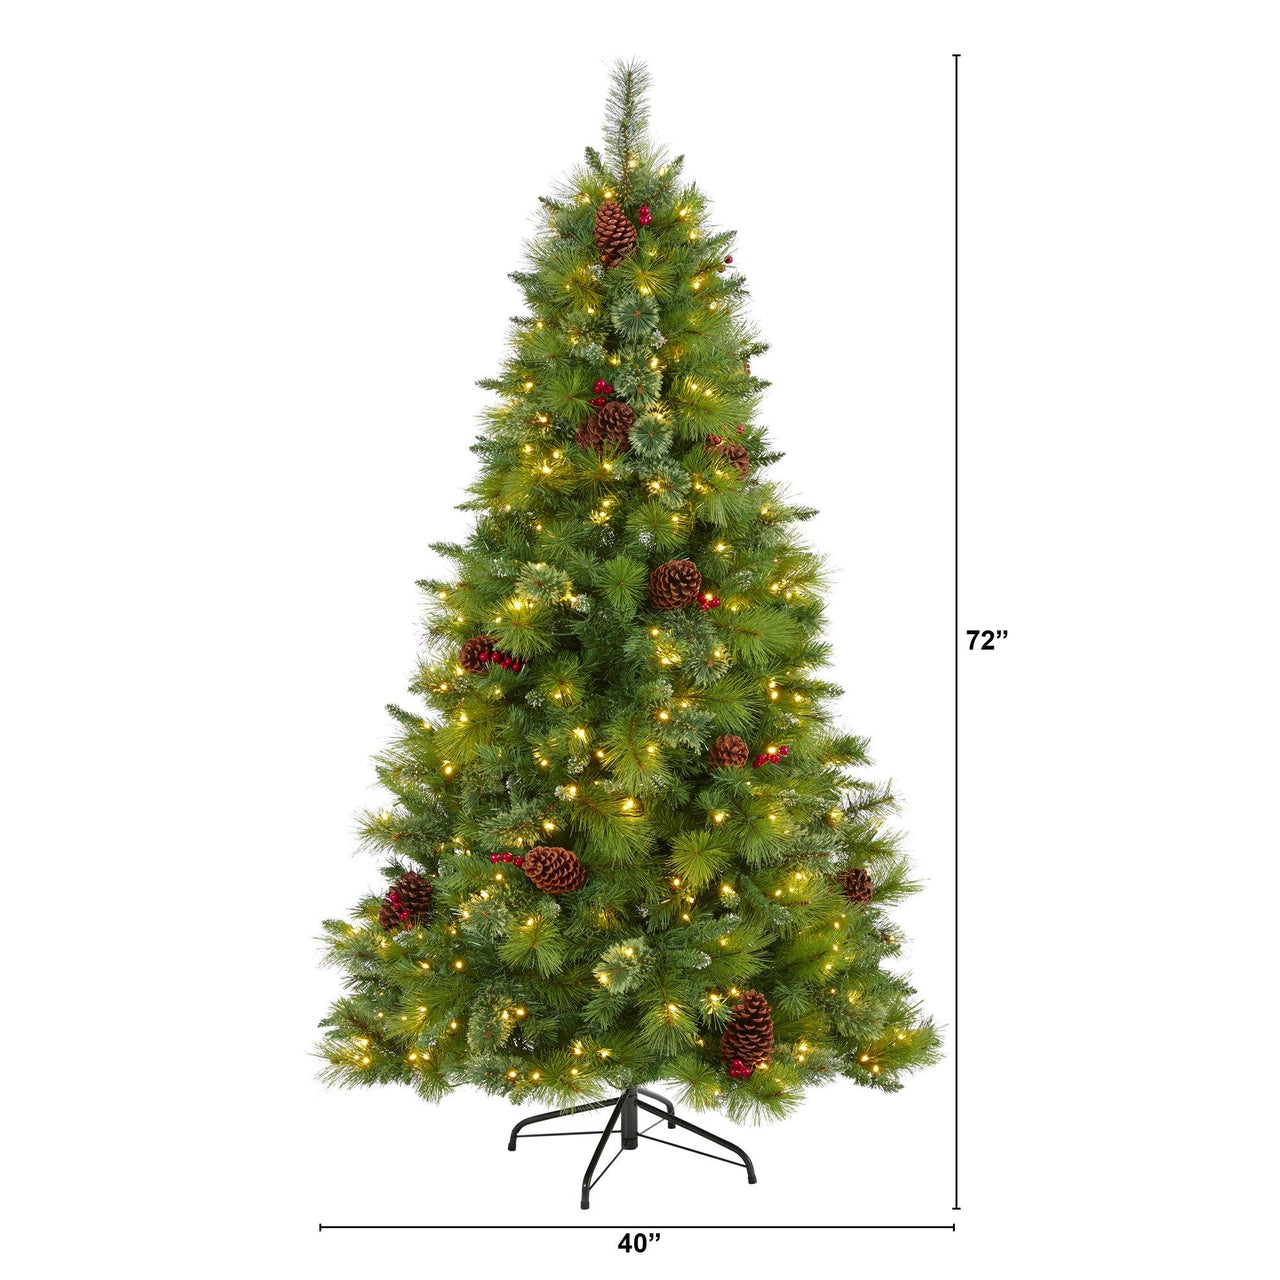 6’ Montana Mixed Pine Artificial Christmas Tree with Pine Cones, Berries and 350 Clear LED Lights - The Fox Decor